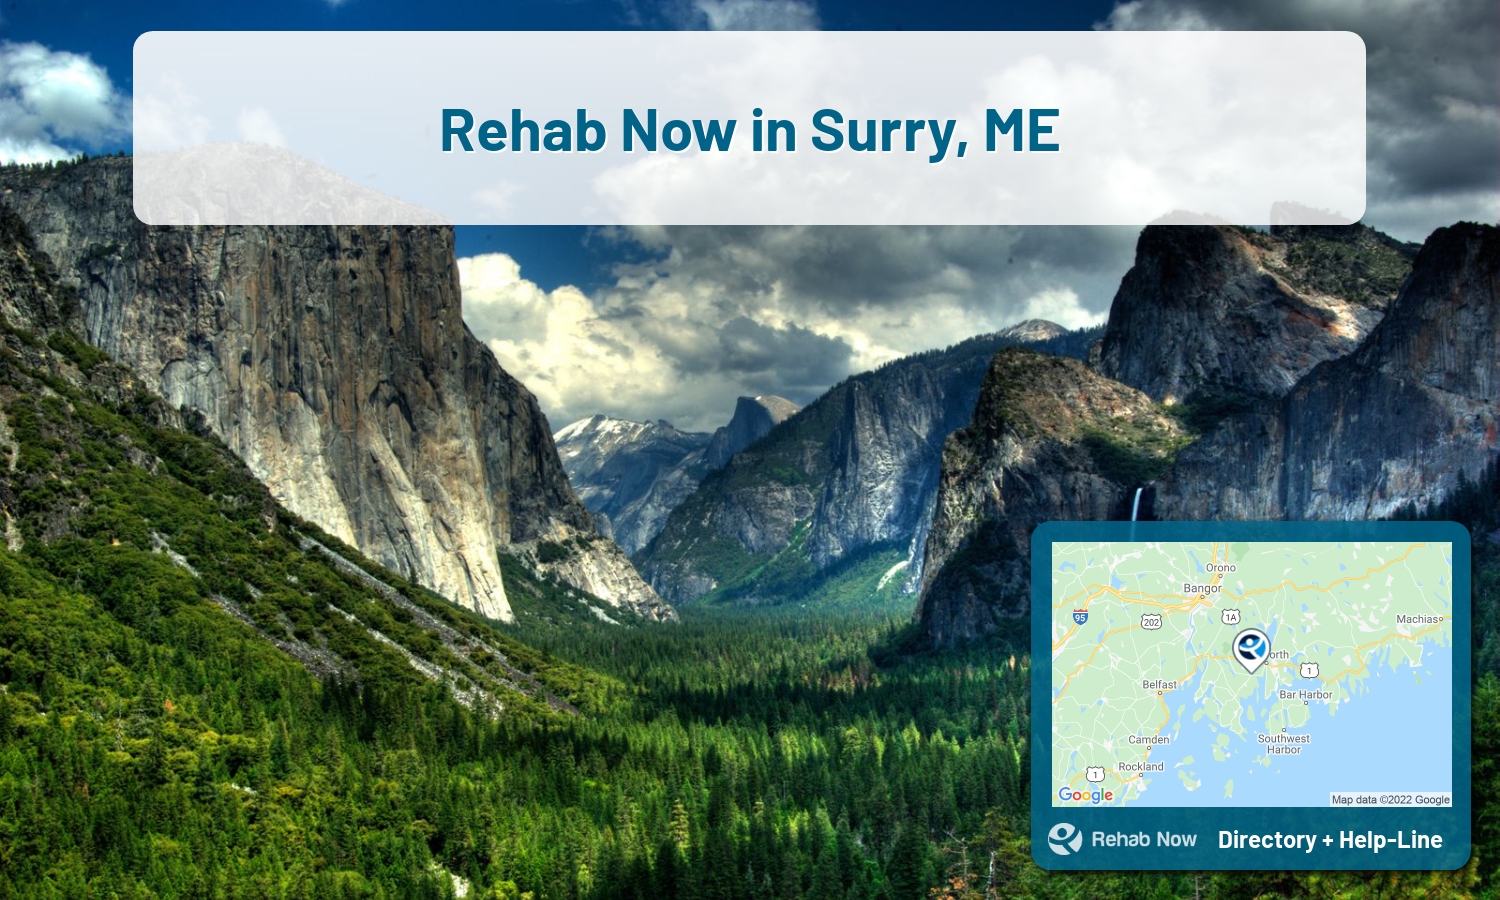 Surry, ME Treatment Centers. Find drug rehab in Surry, Maine, or detox and treatment programs. Get the right help now!